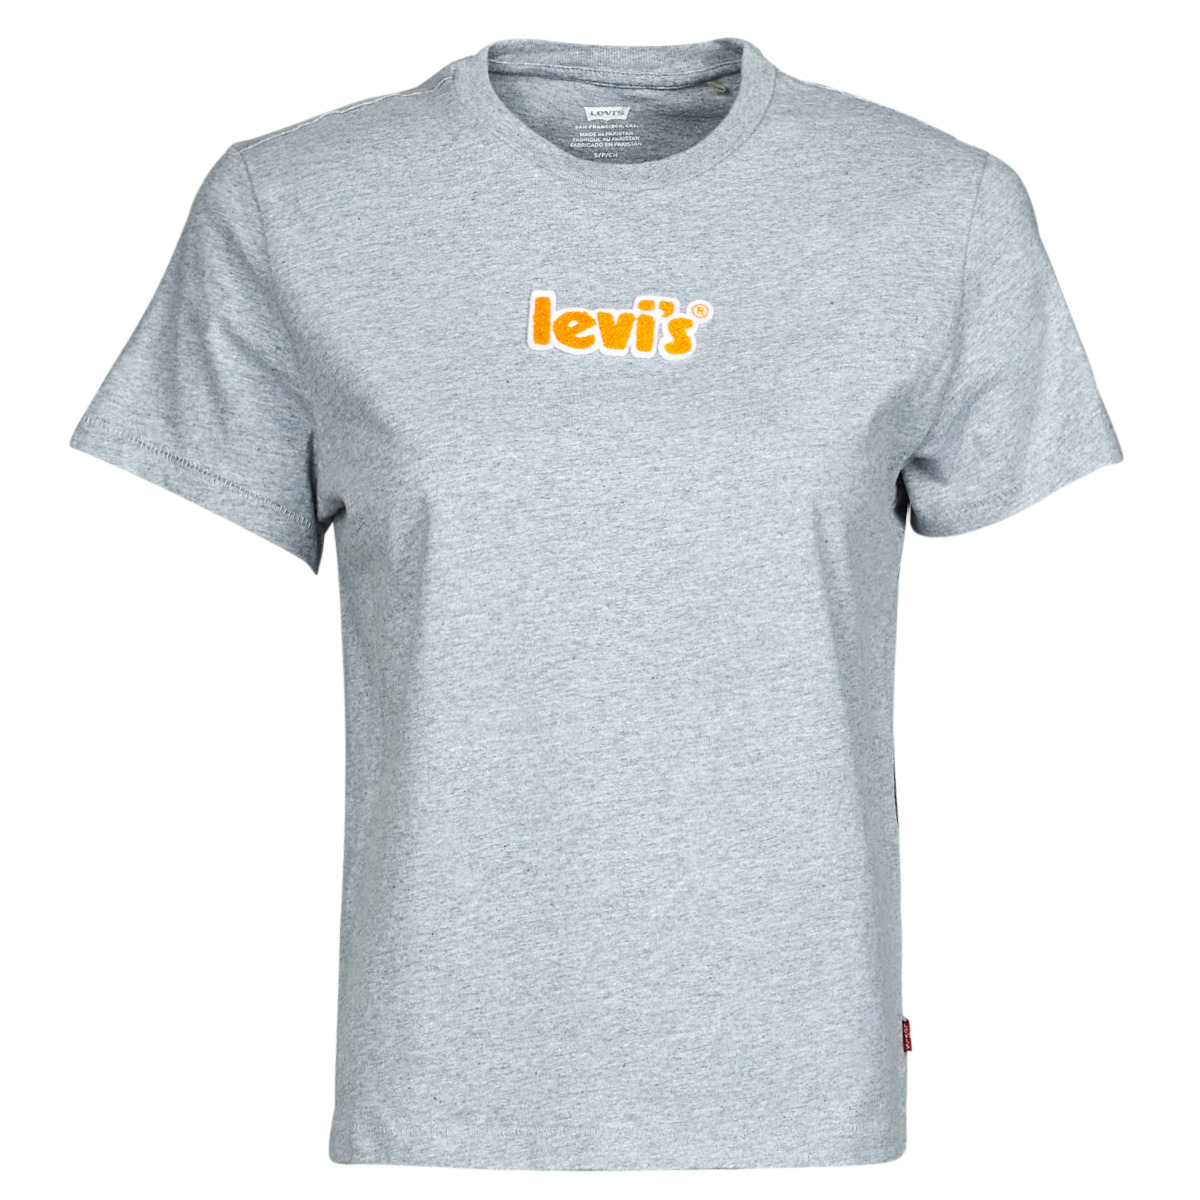 levis  wt-graphic tees  women's t shirt in grey